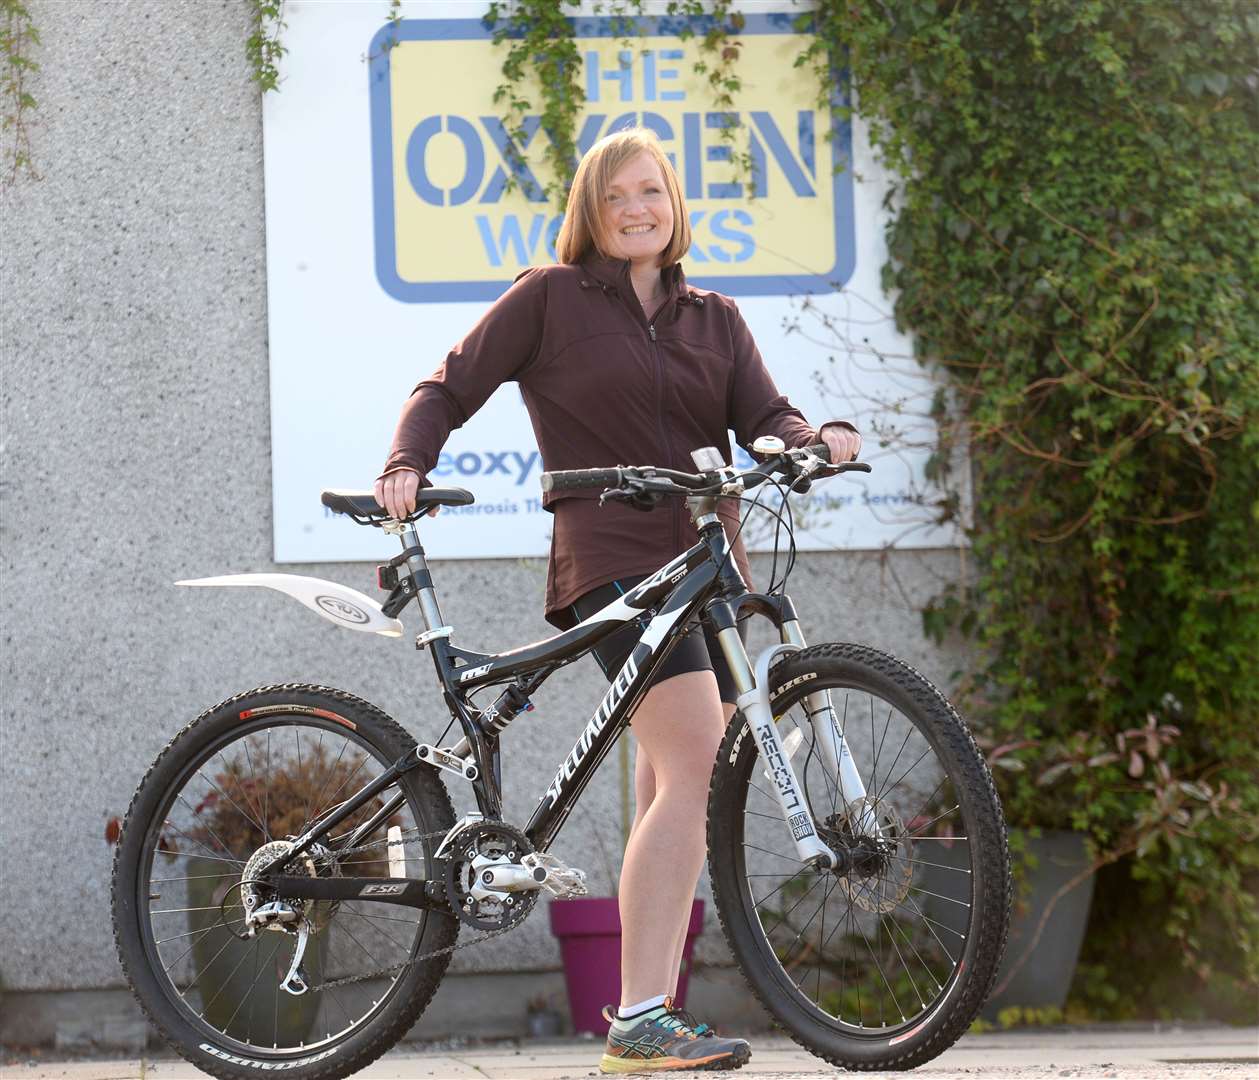 Operations director at the Oxygen Works Beth Morrison gears up for cycle challenge. Picture: Gary Anthony..